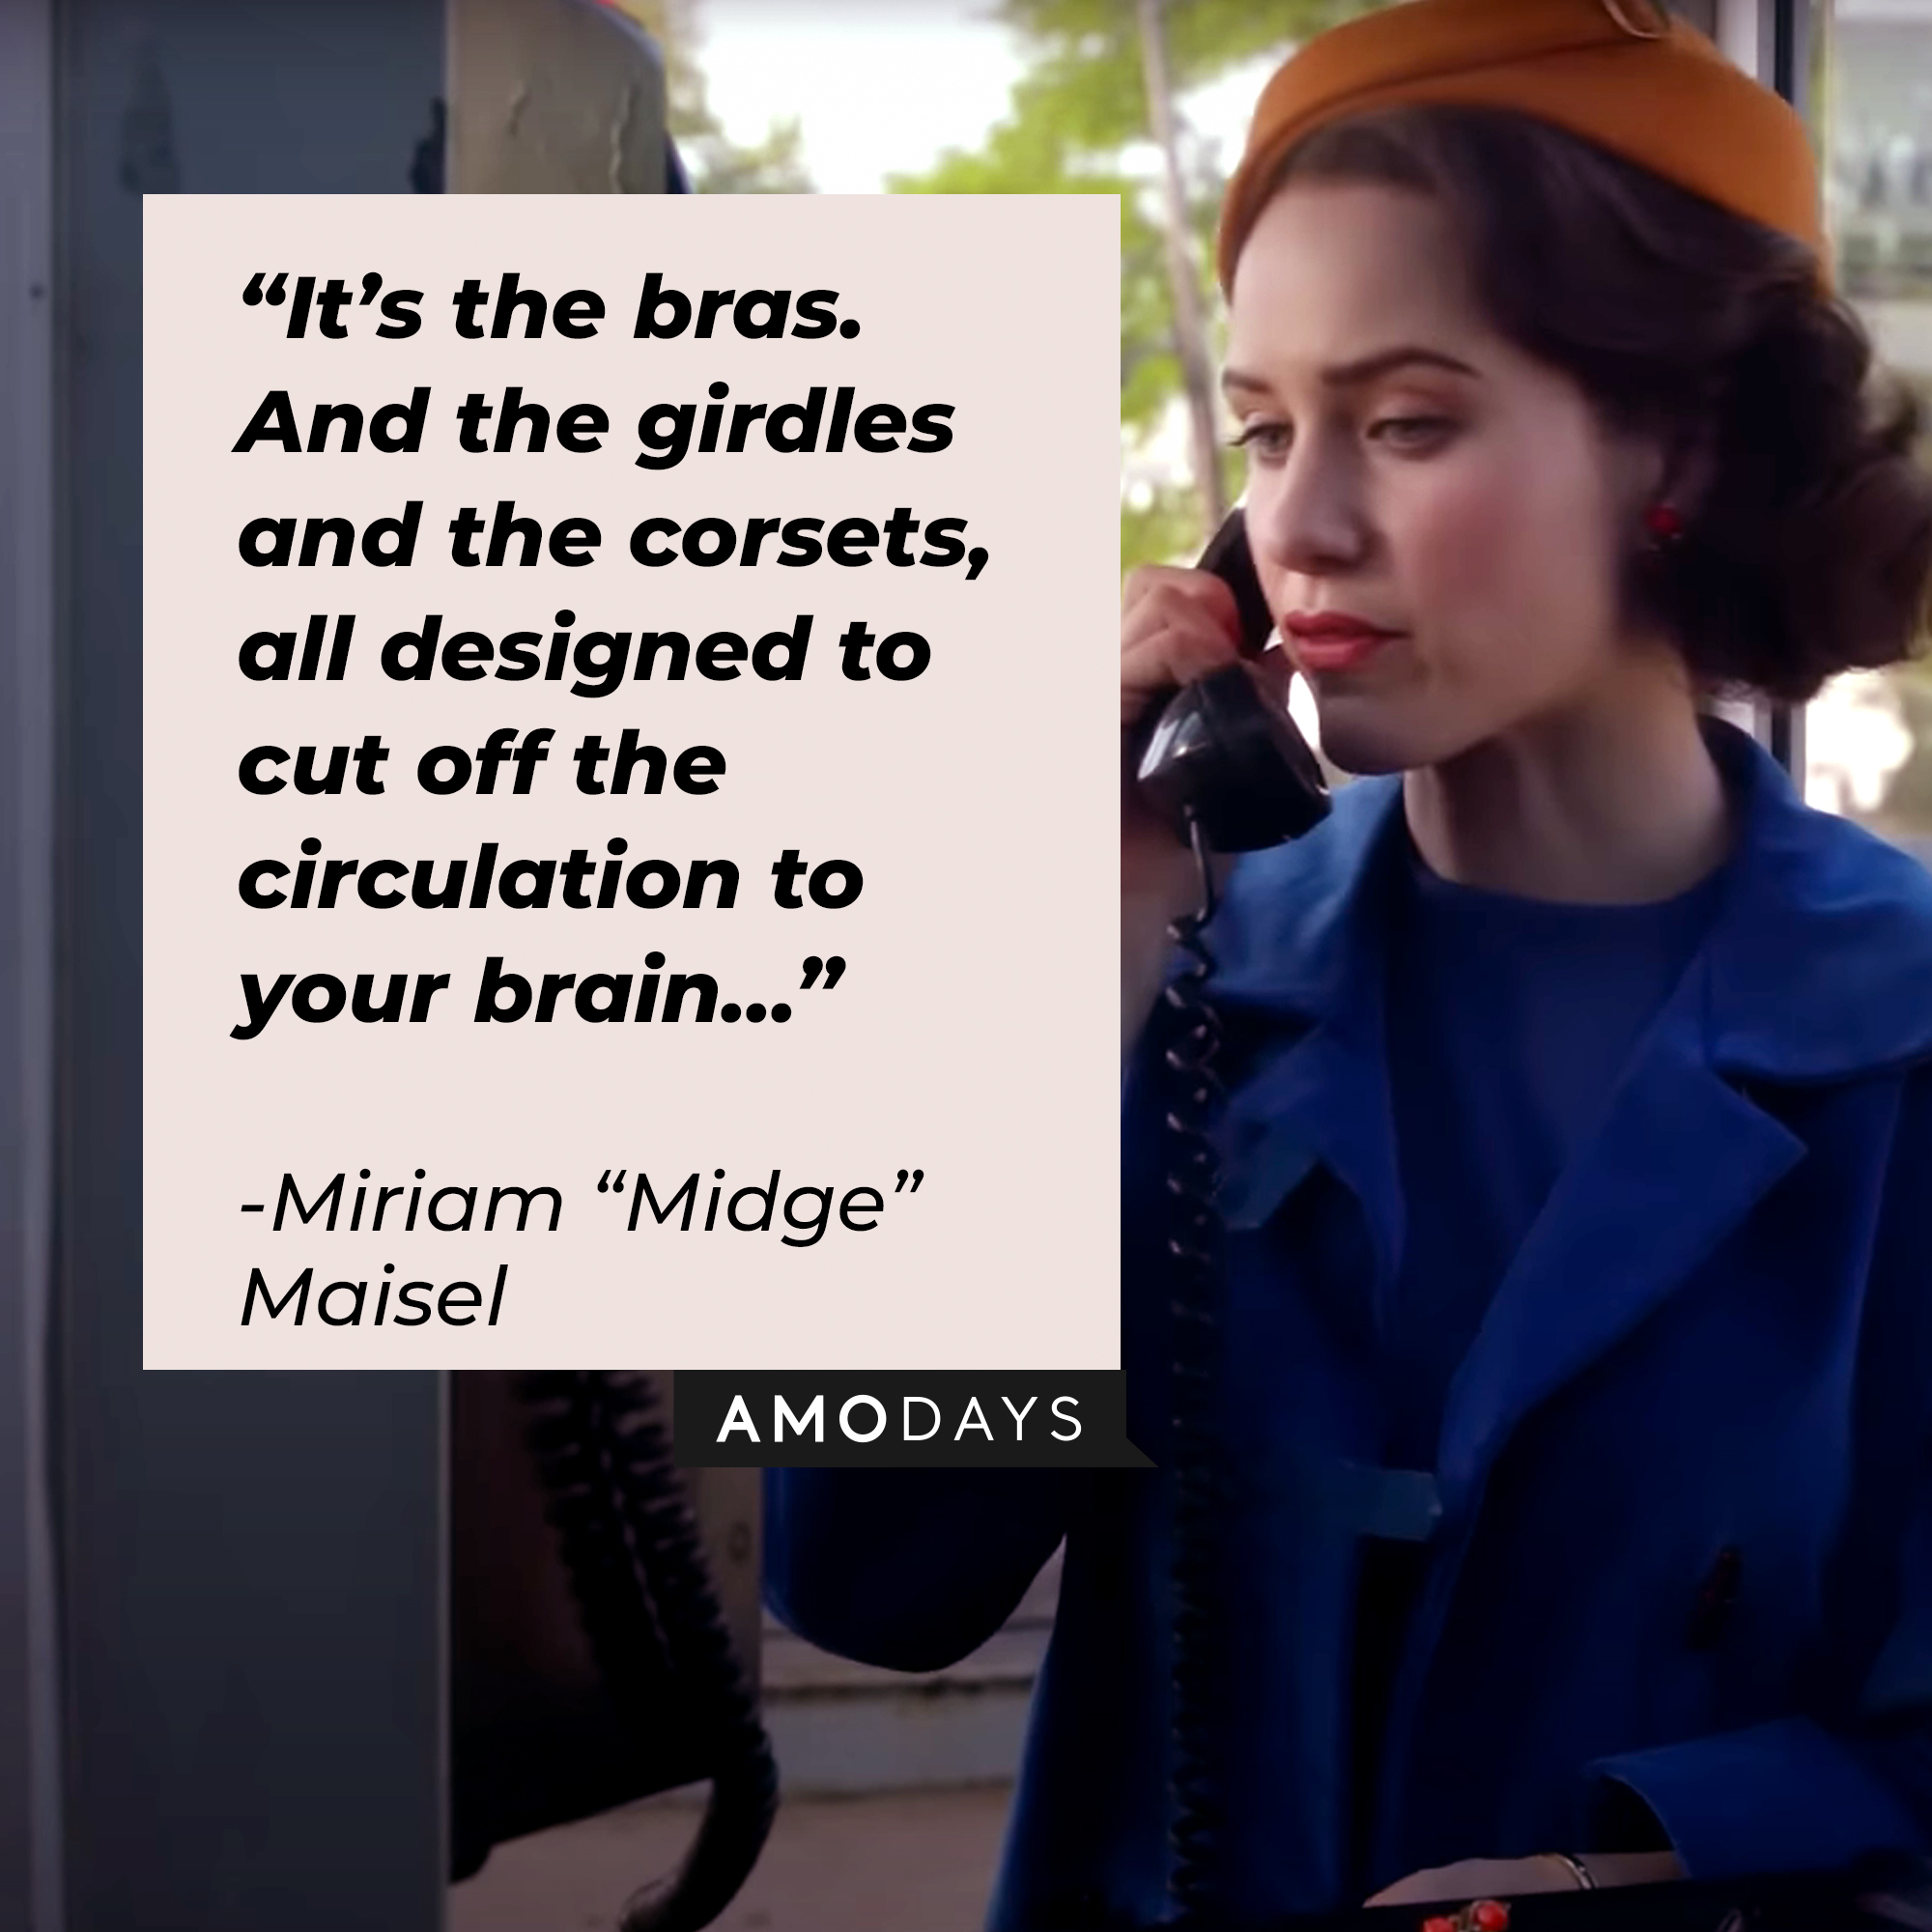 Miriam "Midge" Maisel, with her quote: "It’s the bras. And the girdles and the corsets, all designed to cut off the circulation to your brain..."  | Source: youtube.com/PrimeVideoUK